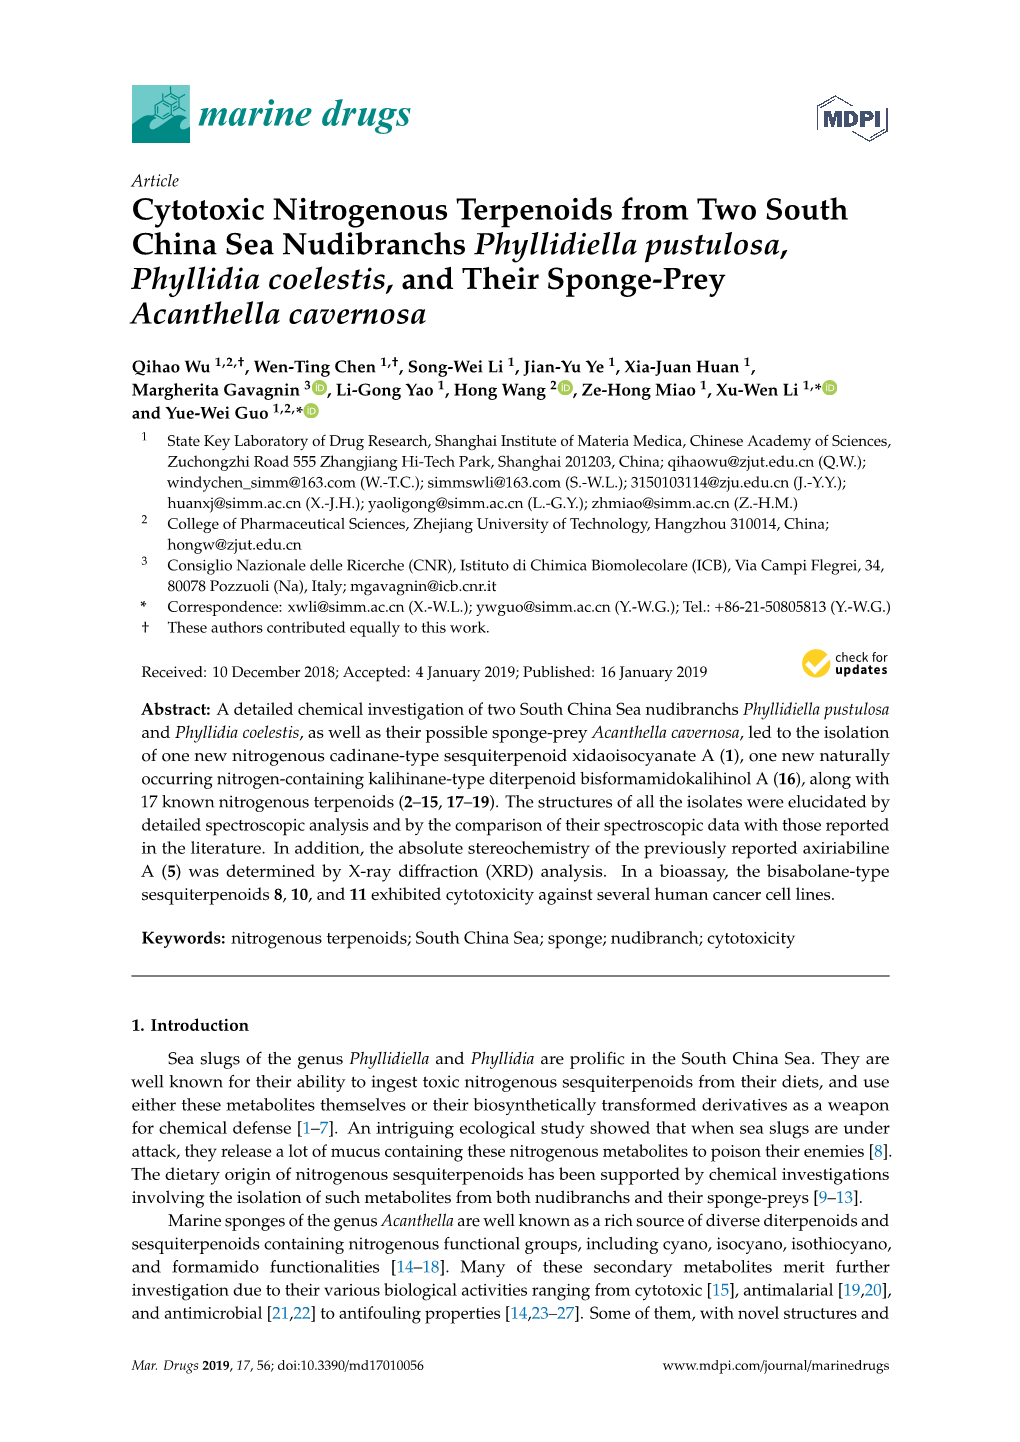 Cytotoxic Nitrogenous Terpenoids from Two South China Sea Nudibranchs Phyllidiella Pustulosa, Phyllidia Coelestis, and Their Sponge-Prey Acanthella Cavernosa